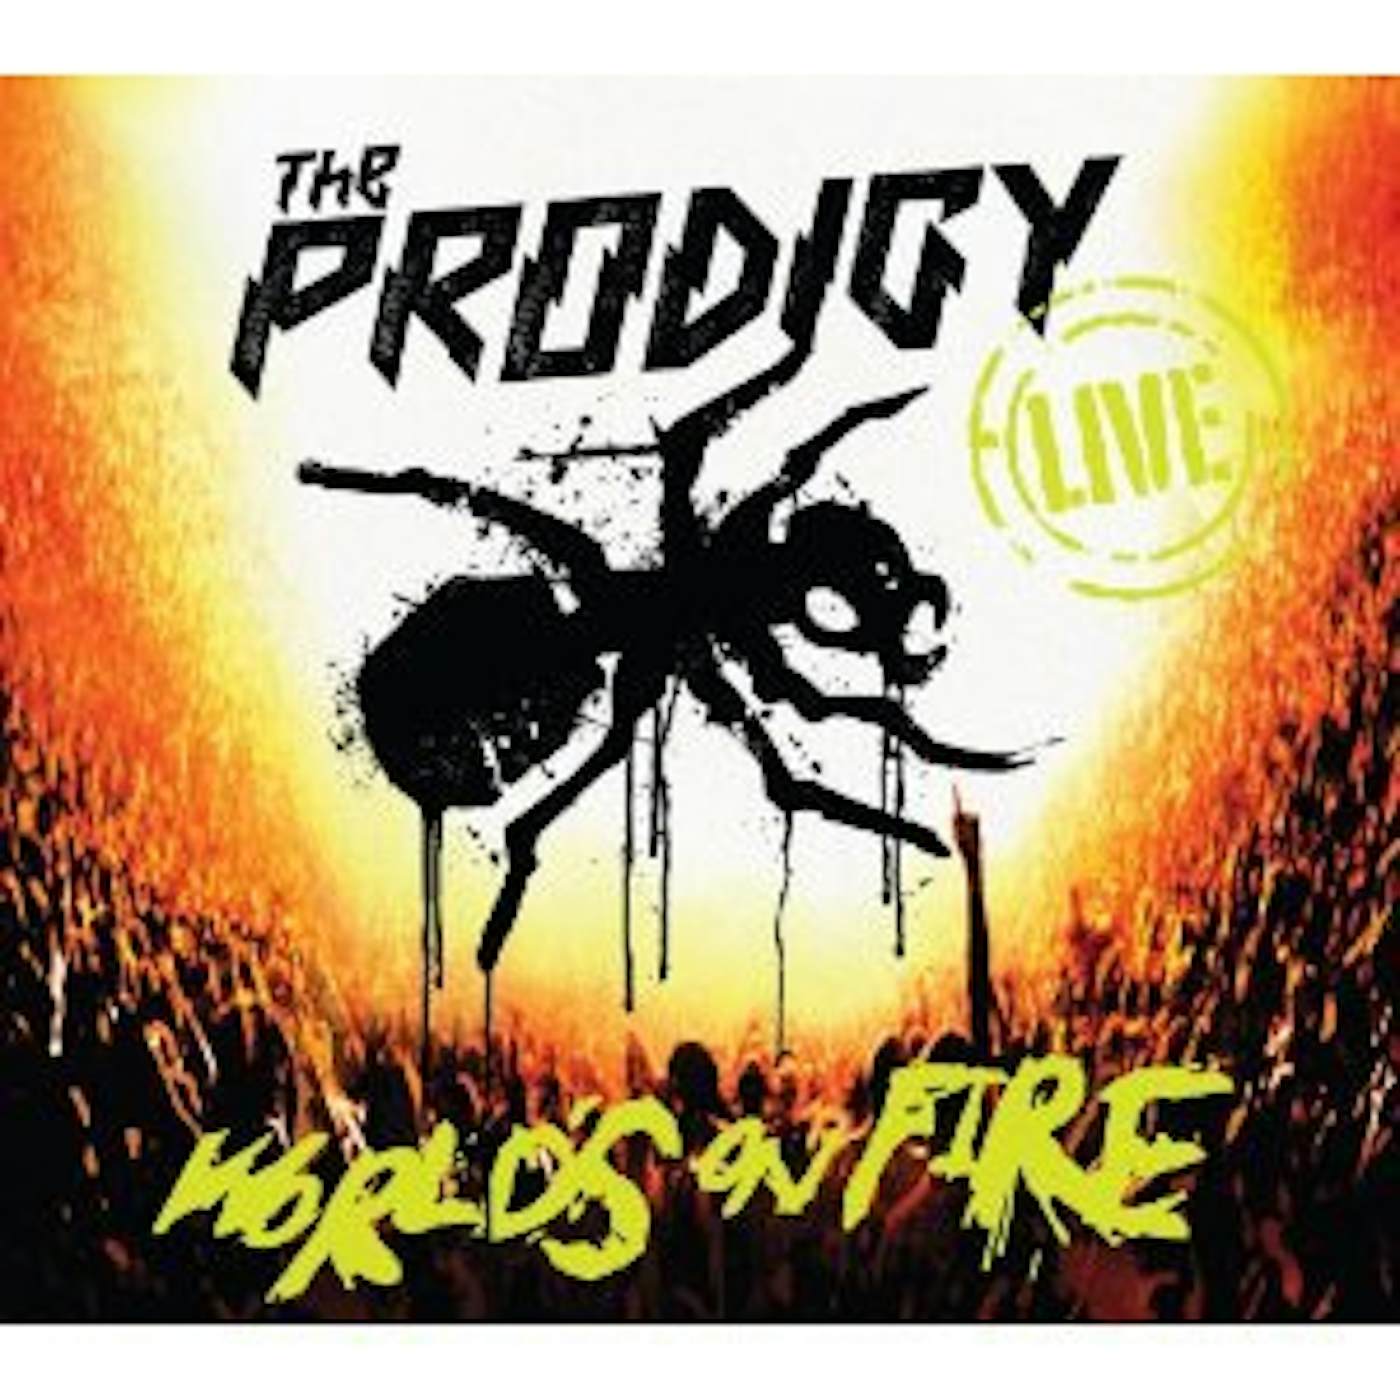 The Prodigy LIVE WORLDS ON FIRE CD